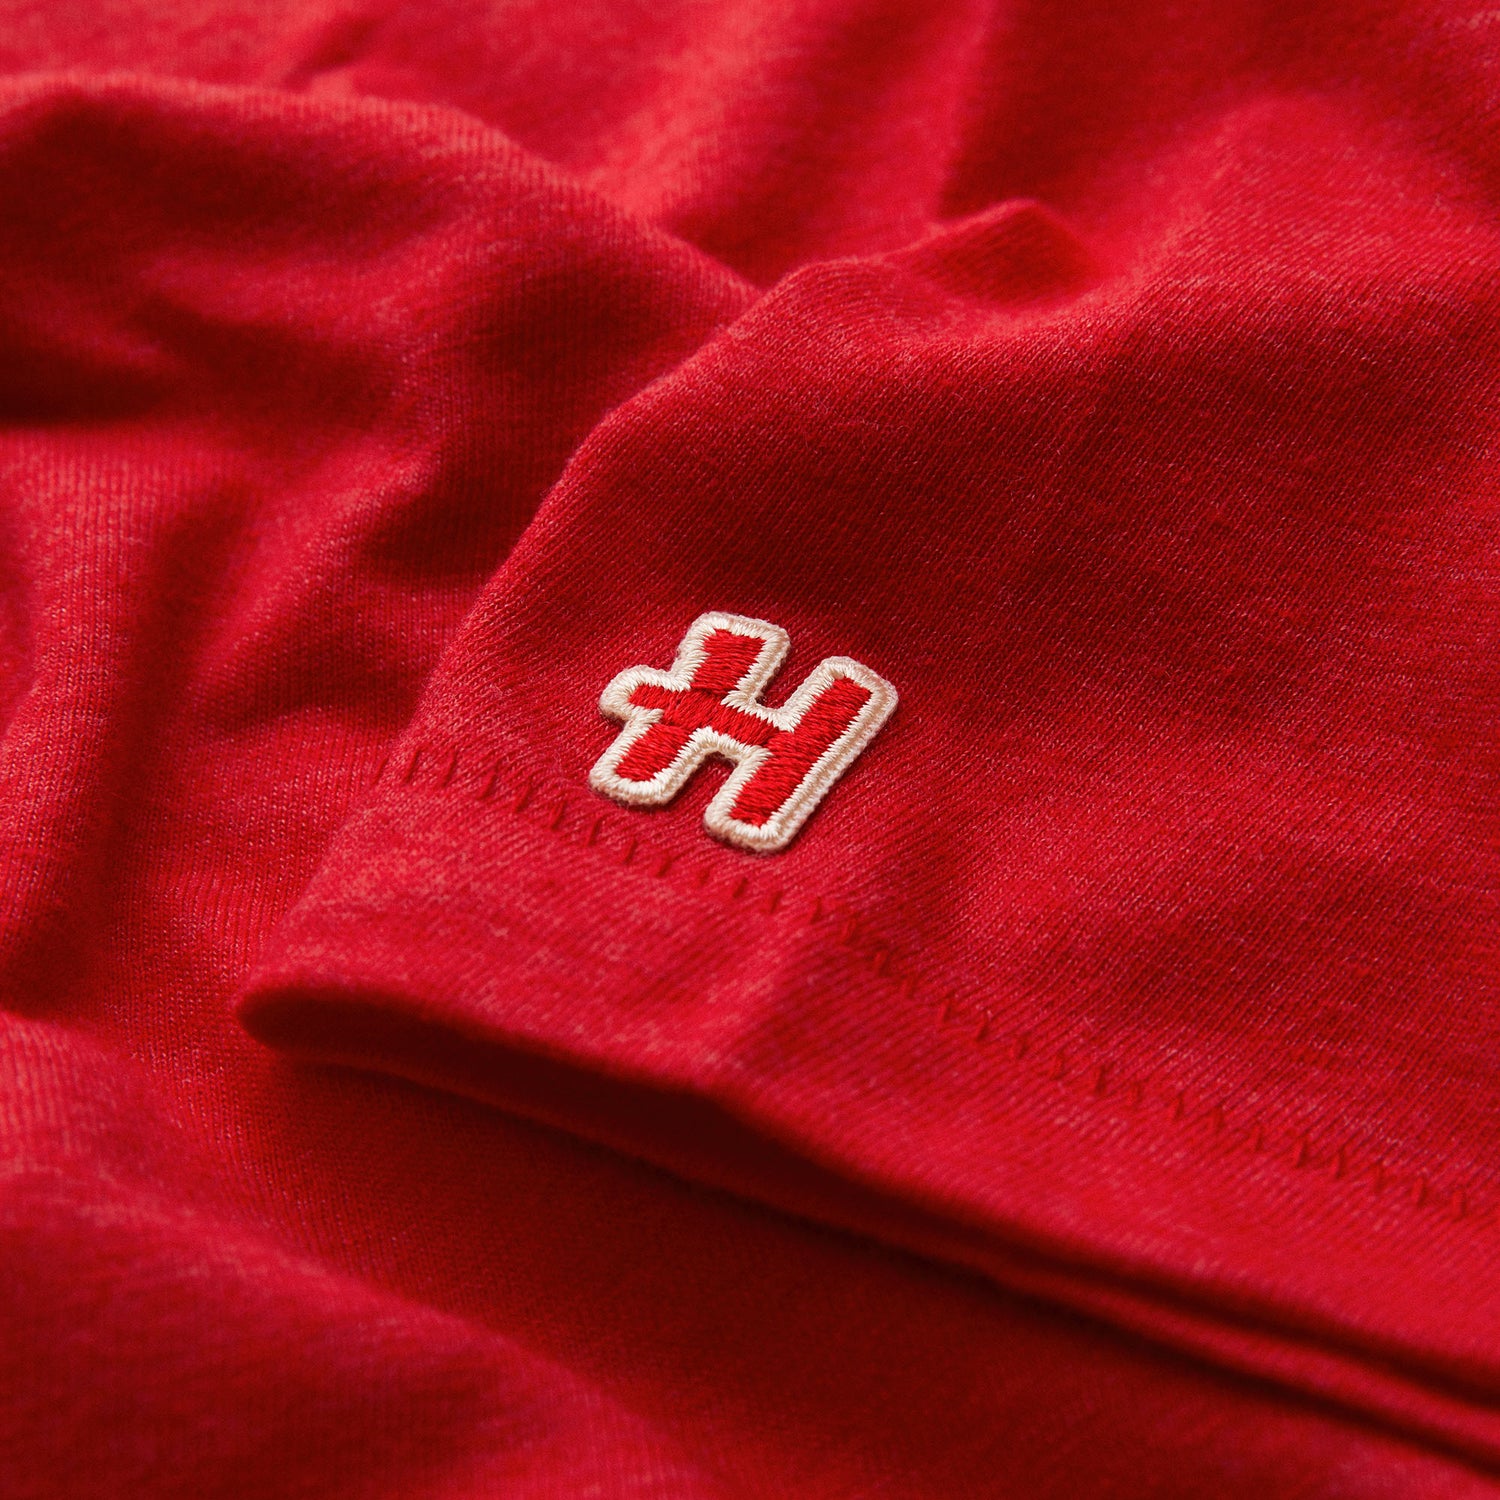 Zoomed in Homage logo on t-shirt sleeve